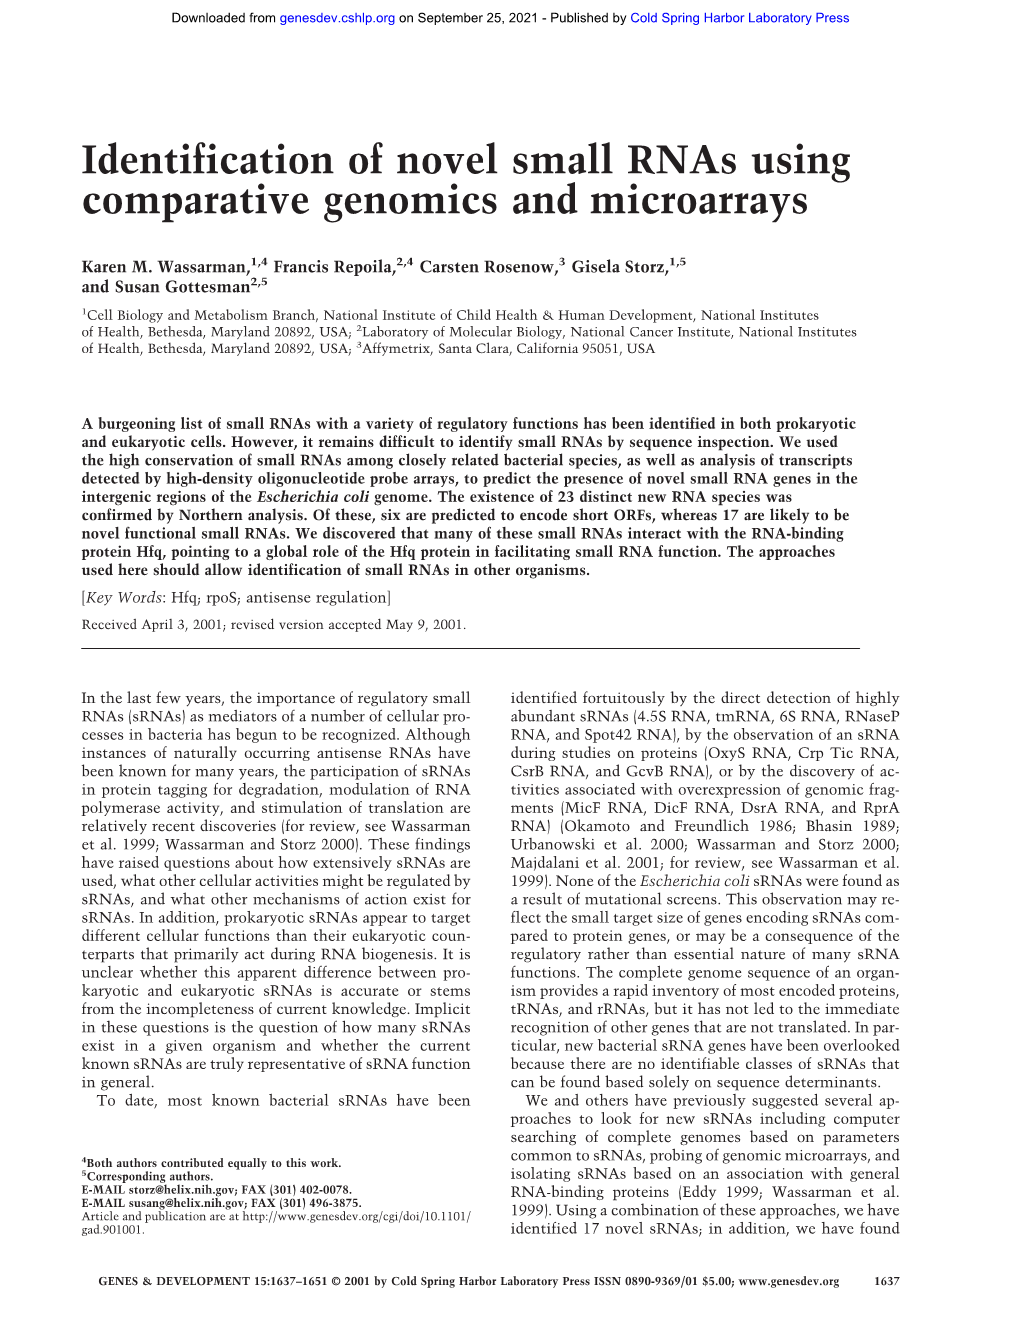 Identification of Novel Small Rnas Using Comparative Genomics and Microarrays